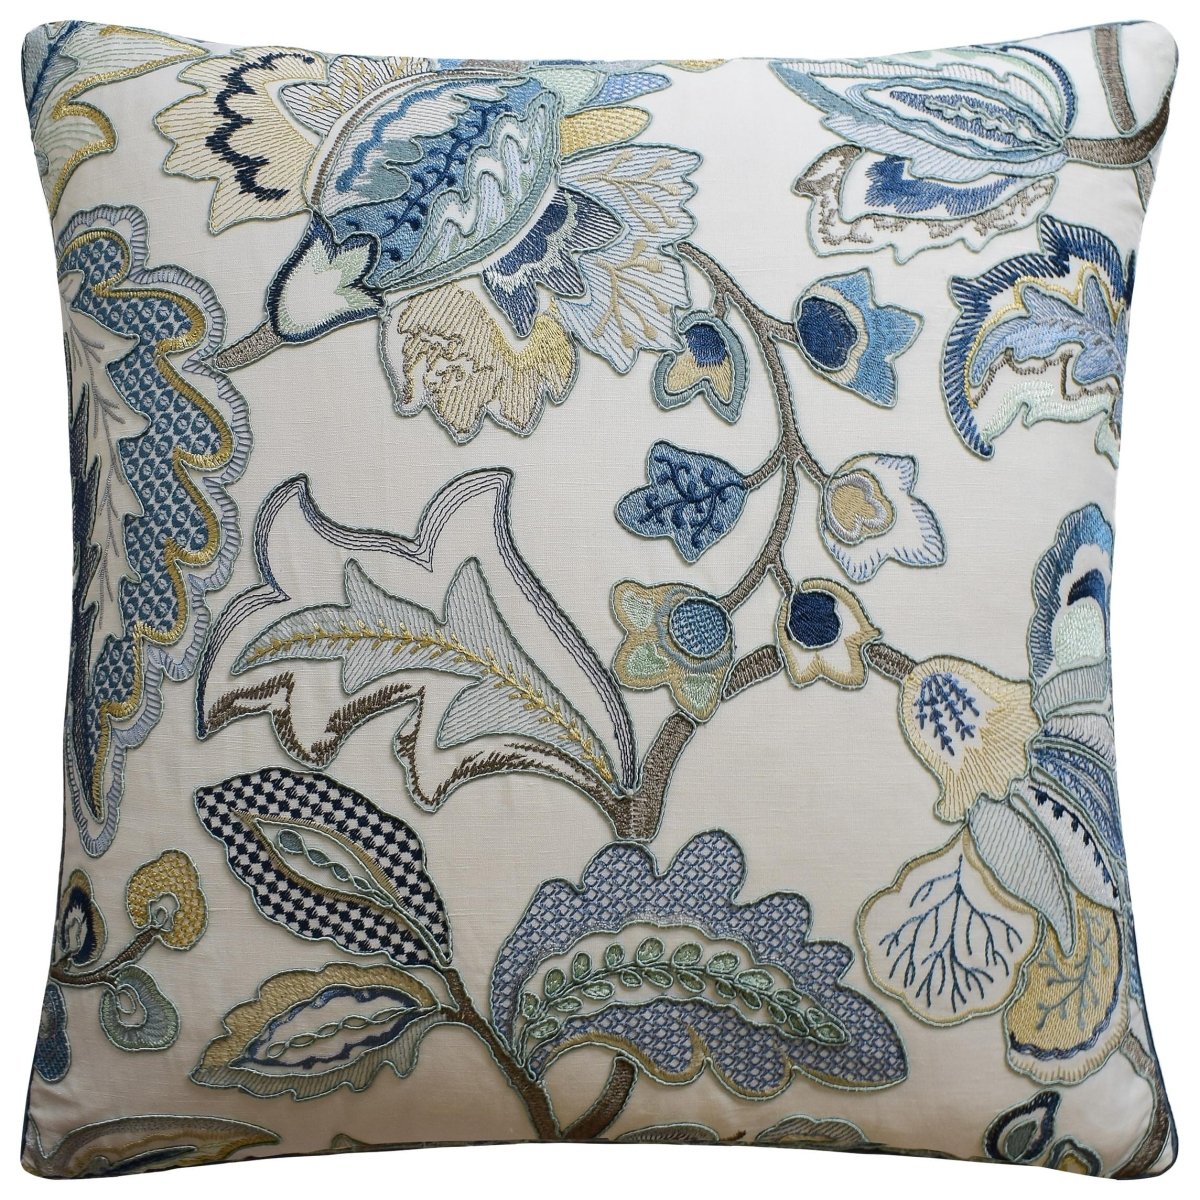 Orford Embroidery Blue and Gold - Throw Pillow by Ryan Studio